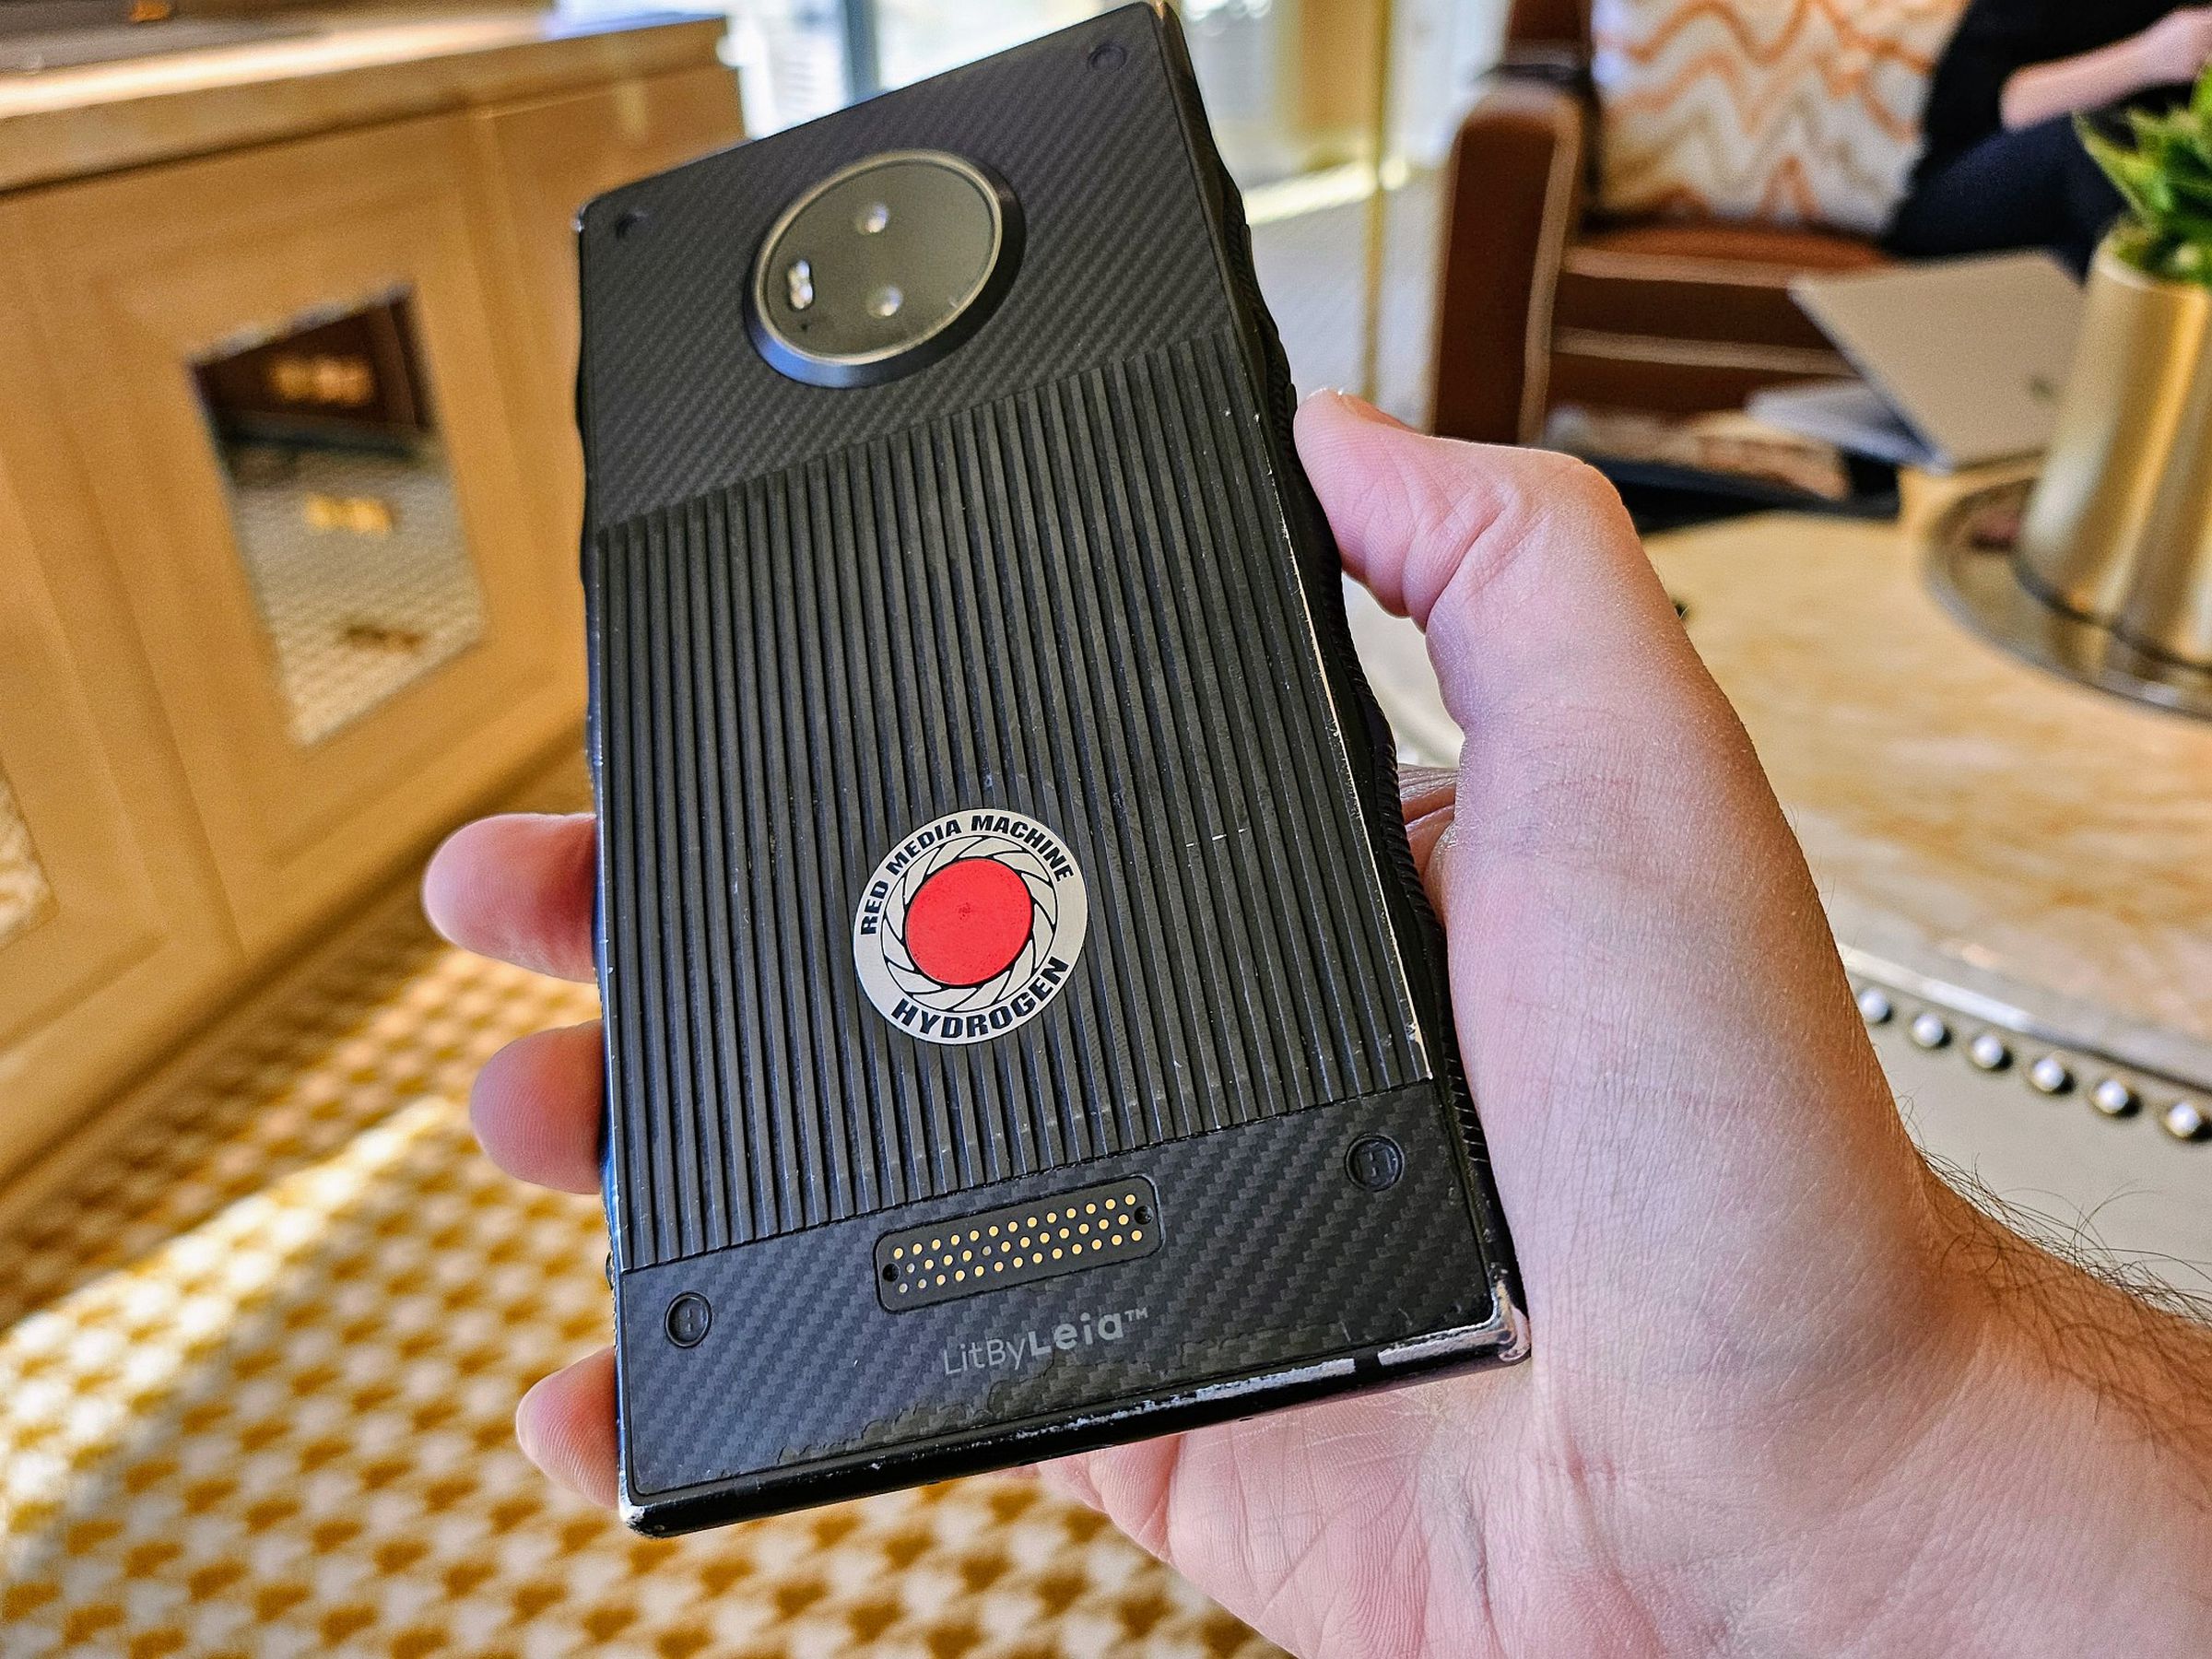 Lots of wear on this phone — but it’s the only phone ever made with his company’s brand name on the back.